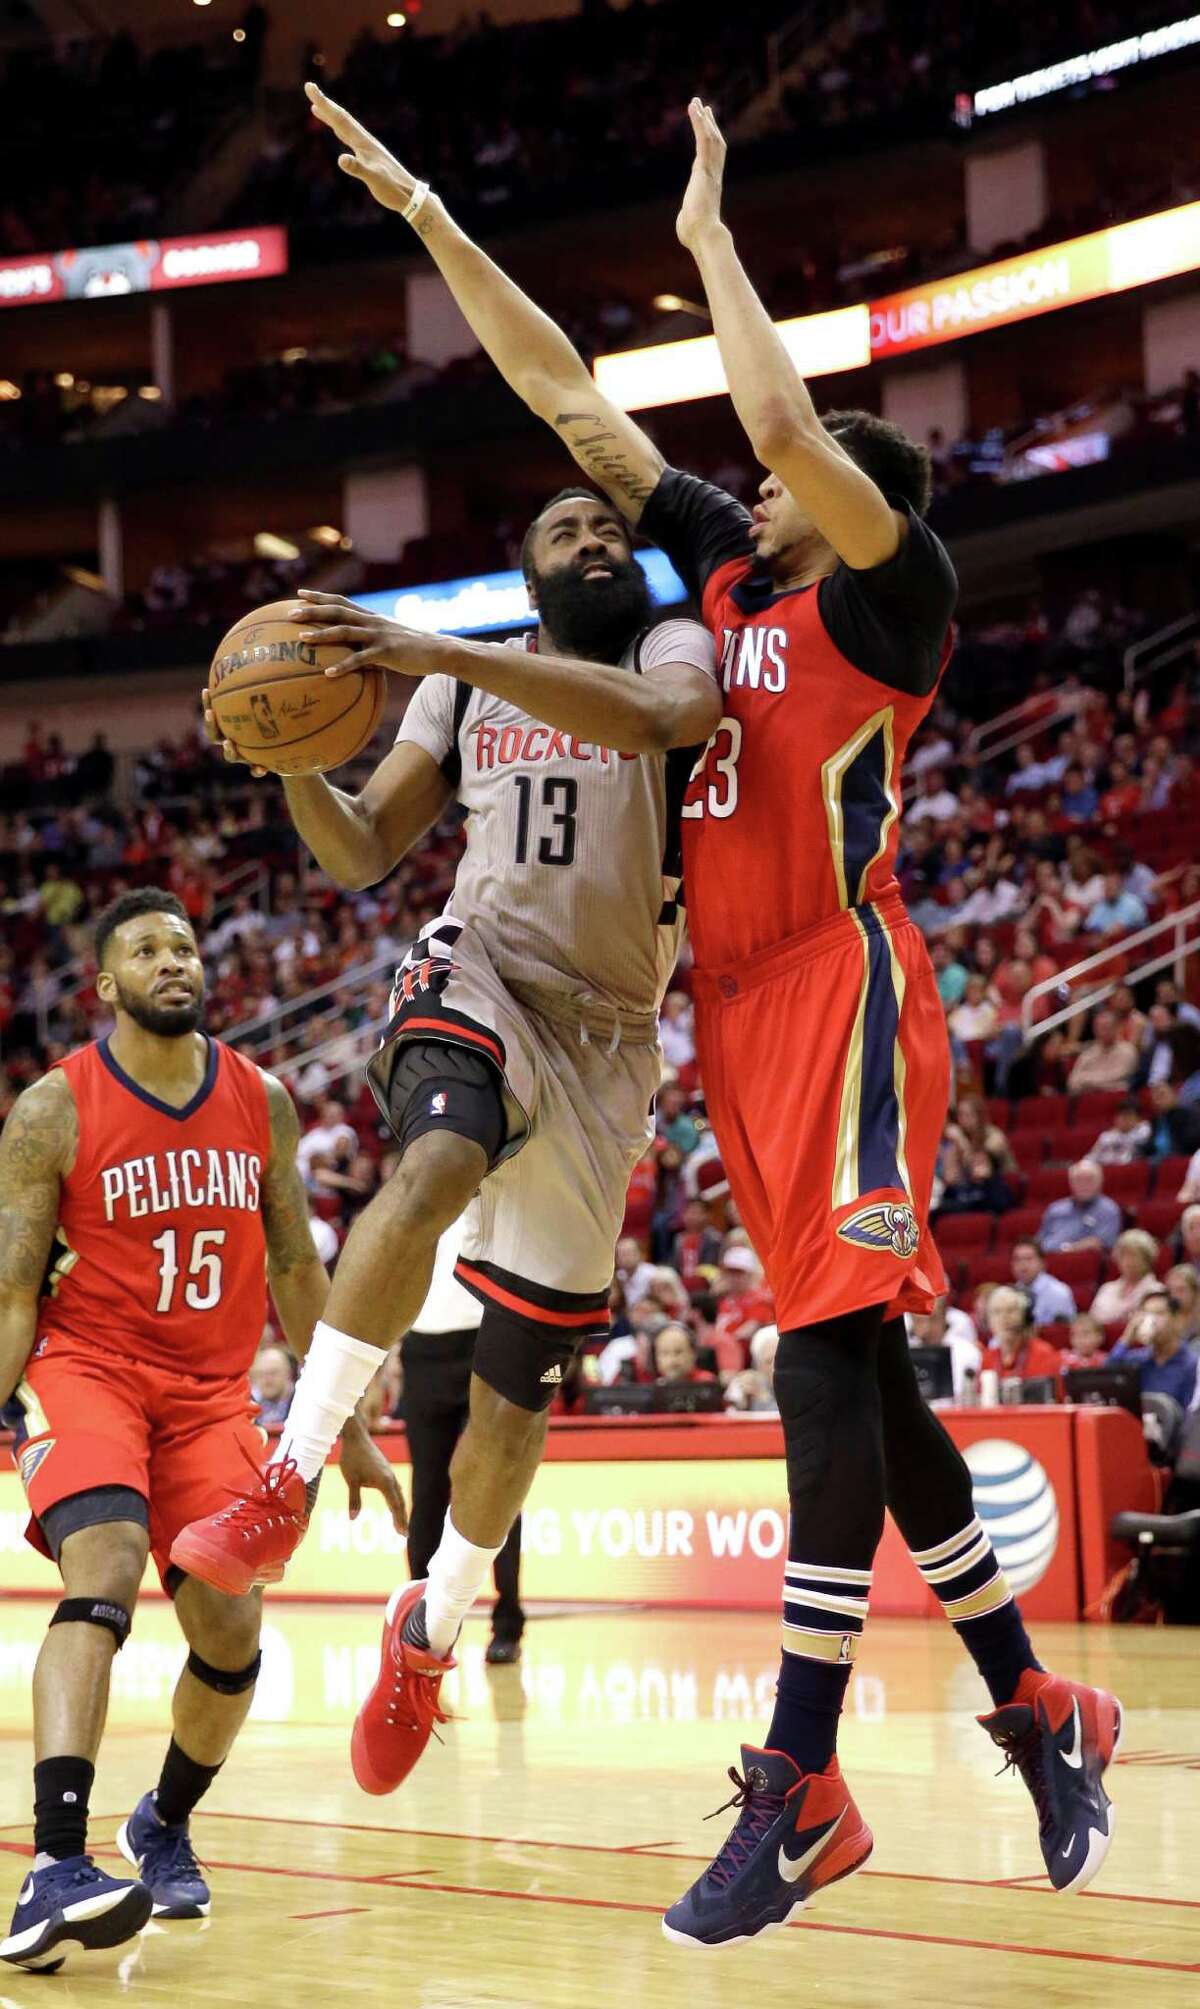 The Rockets' James Harden goes up for a shot as the Pelicans' Anthony Davis (23) defends. Harden had a game-high 39 points.